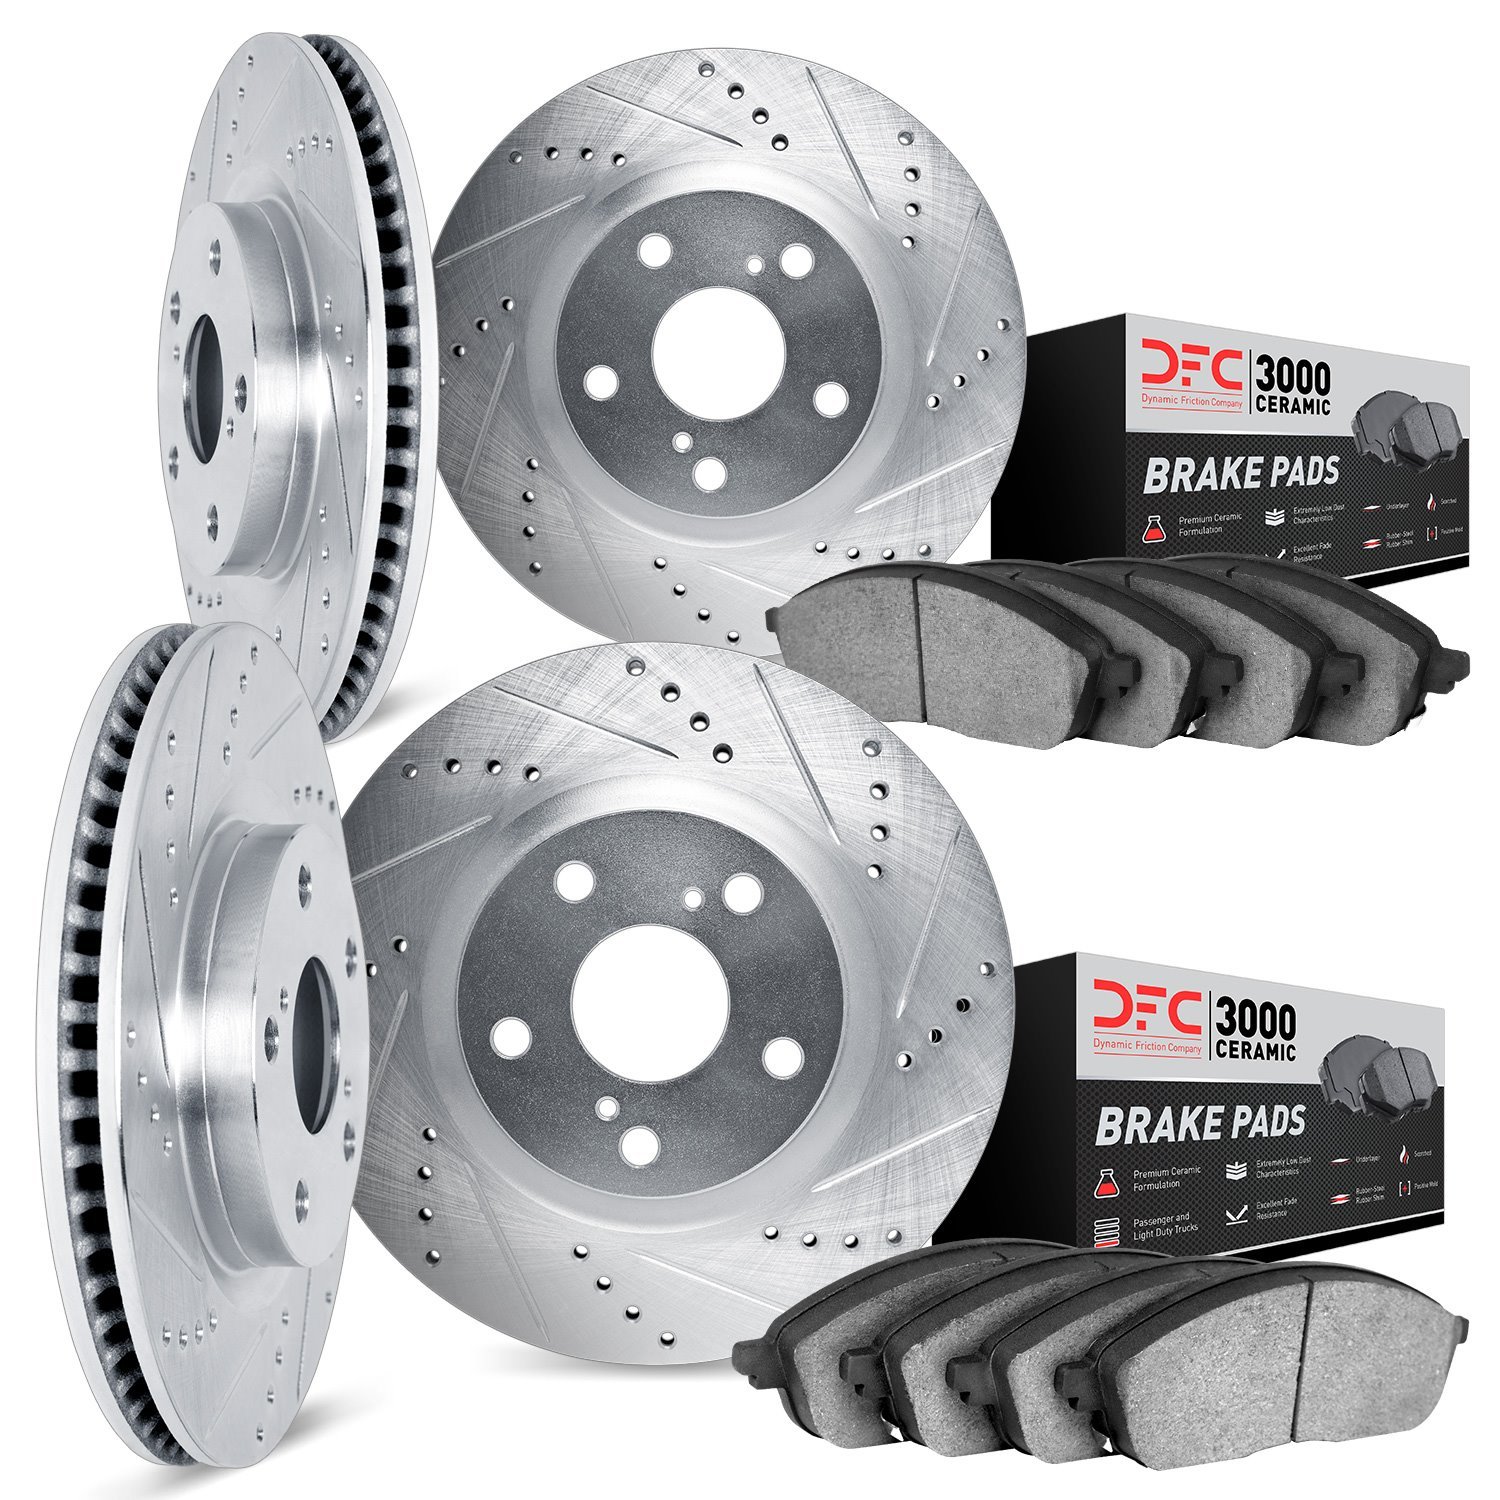 7304-54100 Drilled/Slotted Brake Rotor with 3000-Series Ceramic Brake Pads Kit [Silver], 2013-2019 Ford/Lincoln/Mercury/Mazda, P